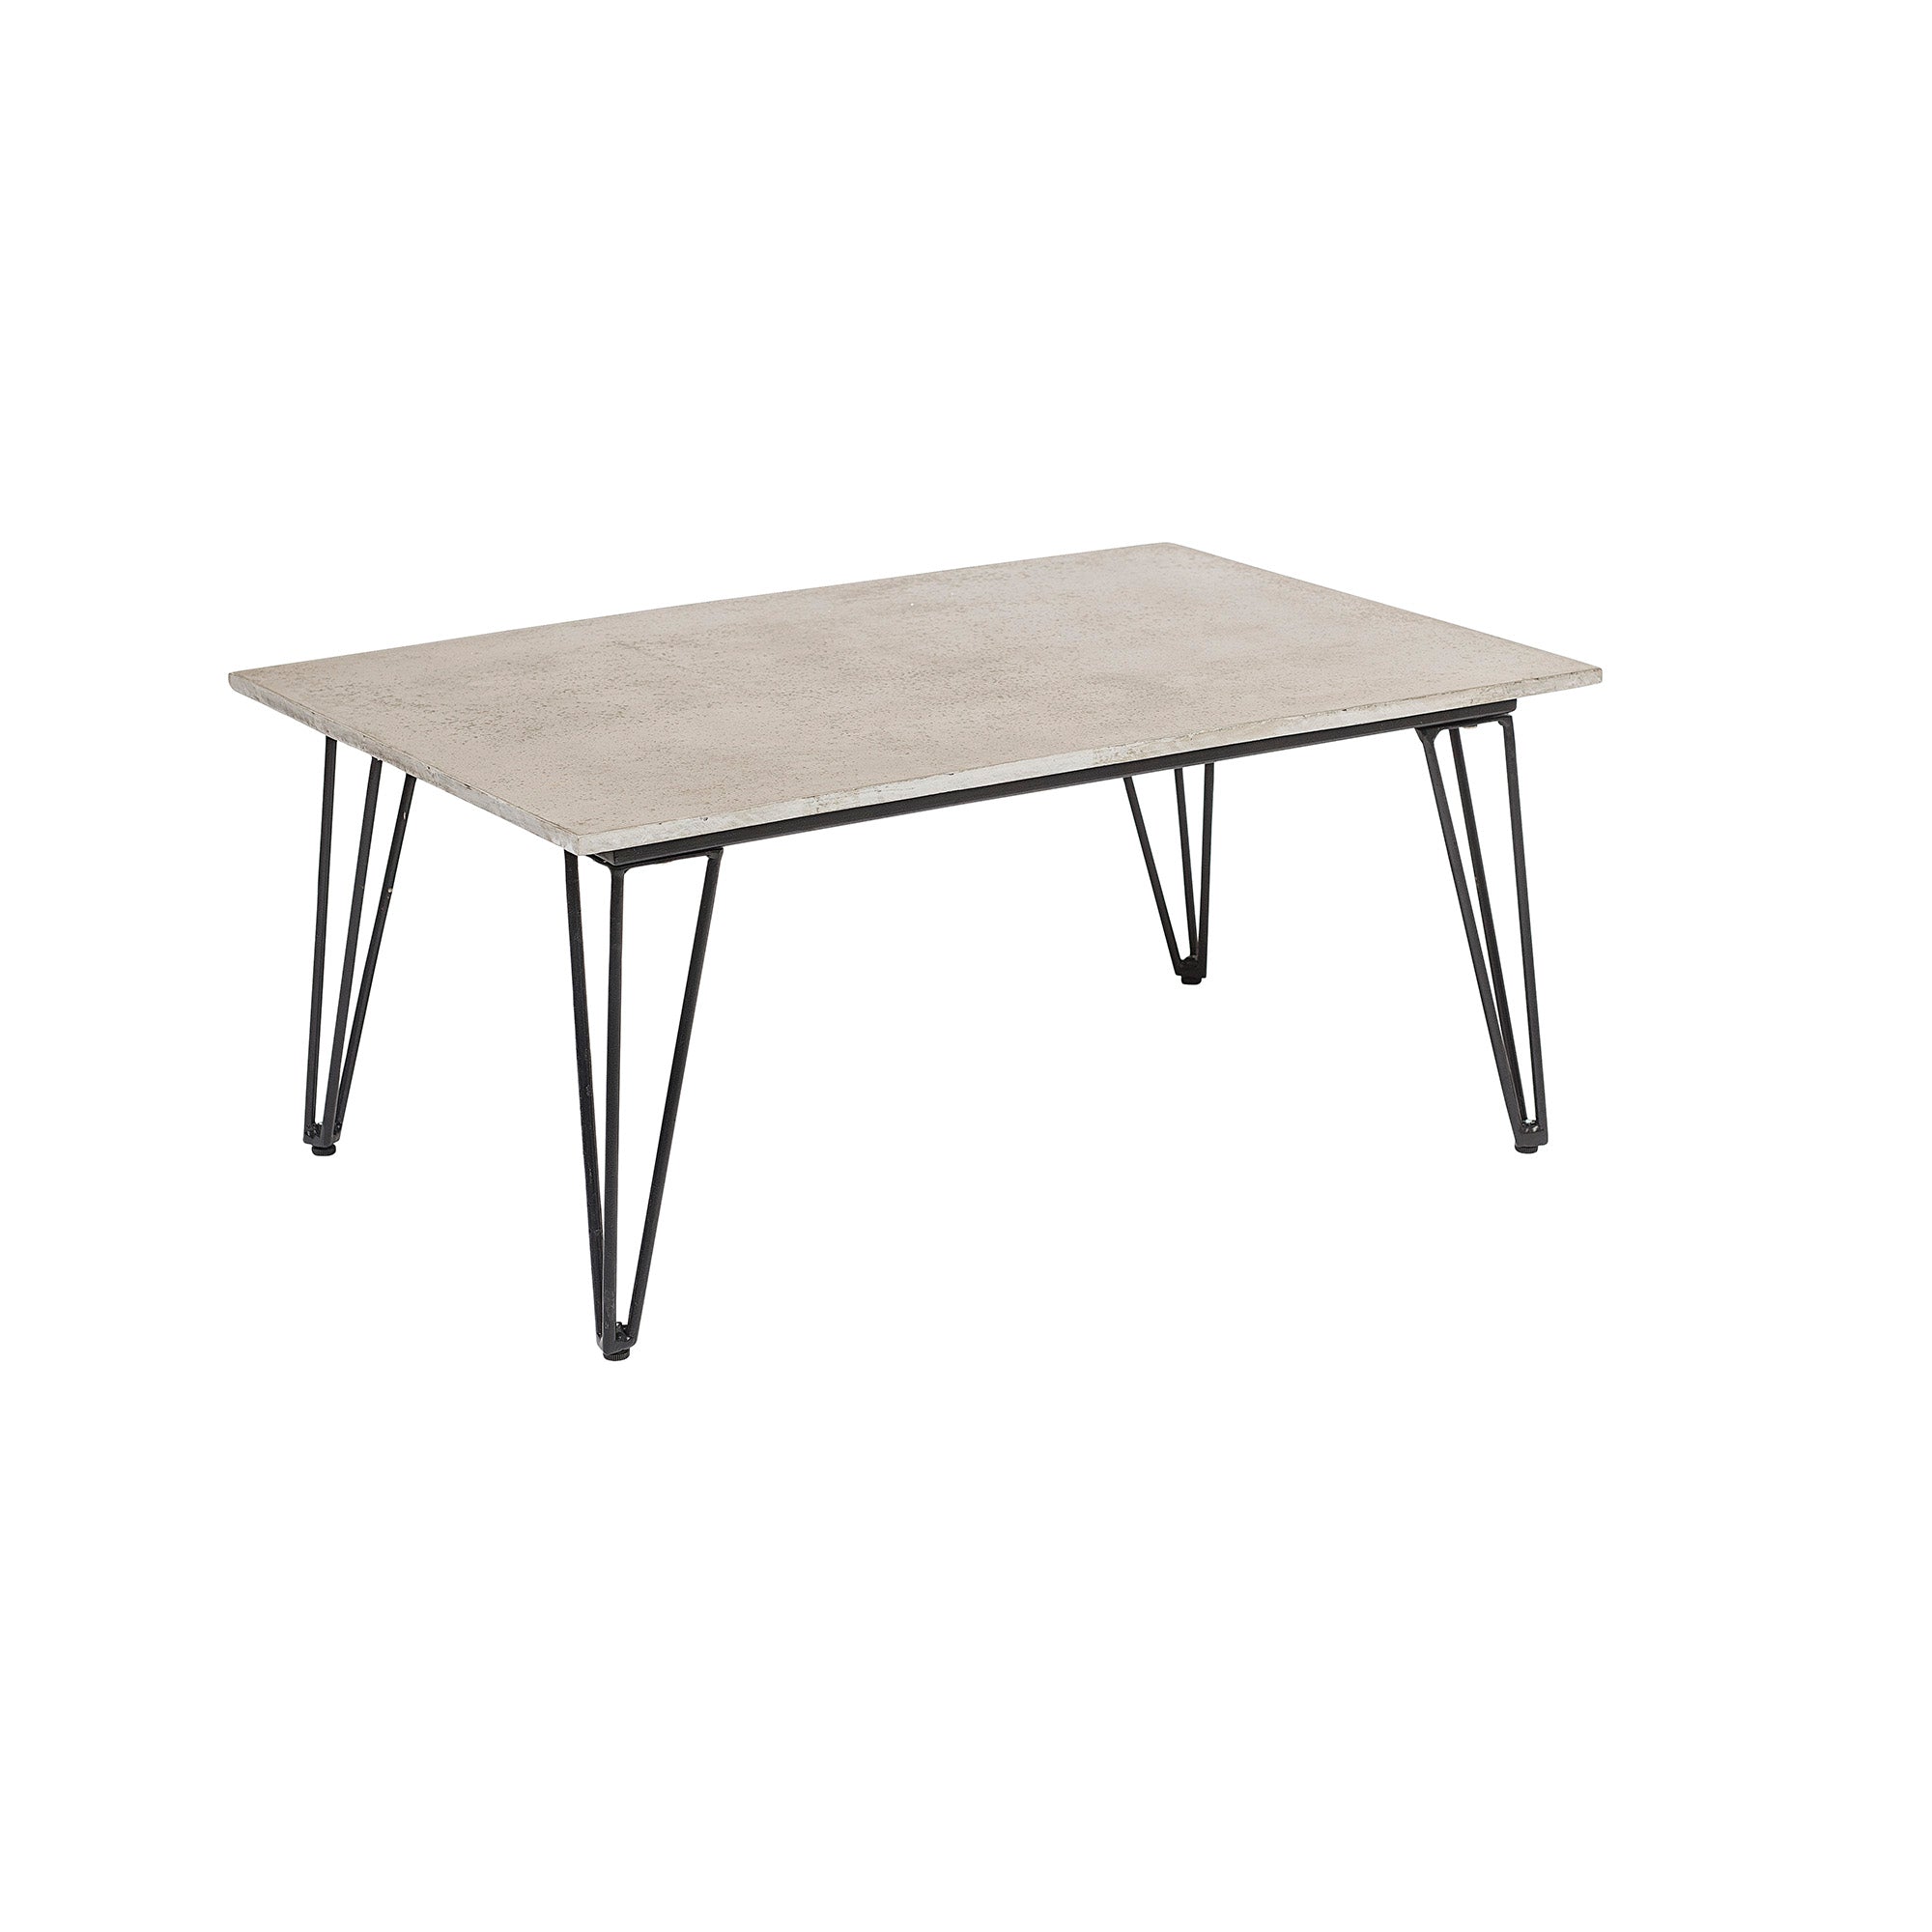 Bloomingville Outdoor Mundo Fiber Cement Coffee Table in Natural